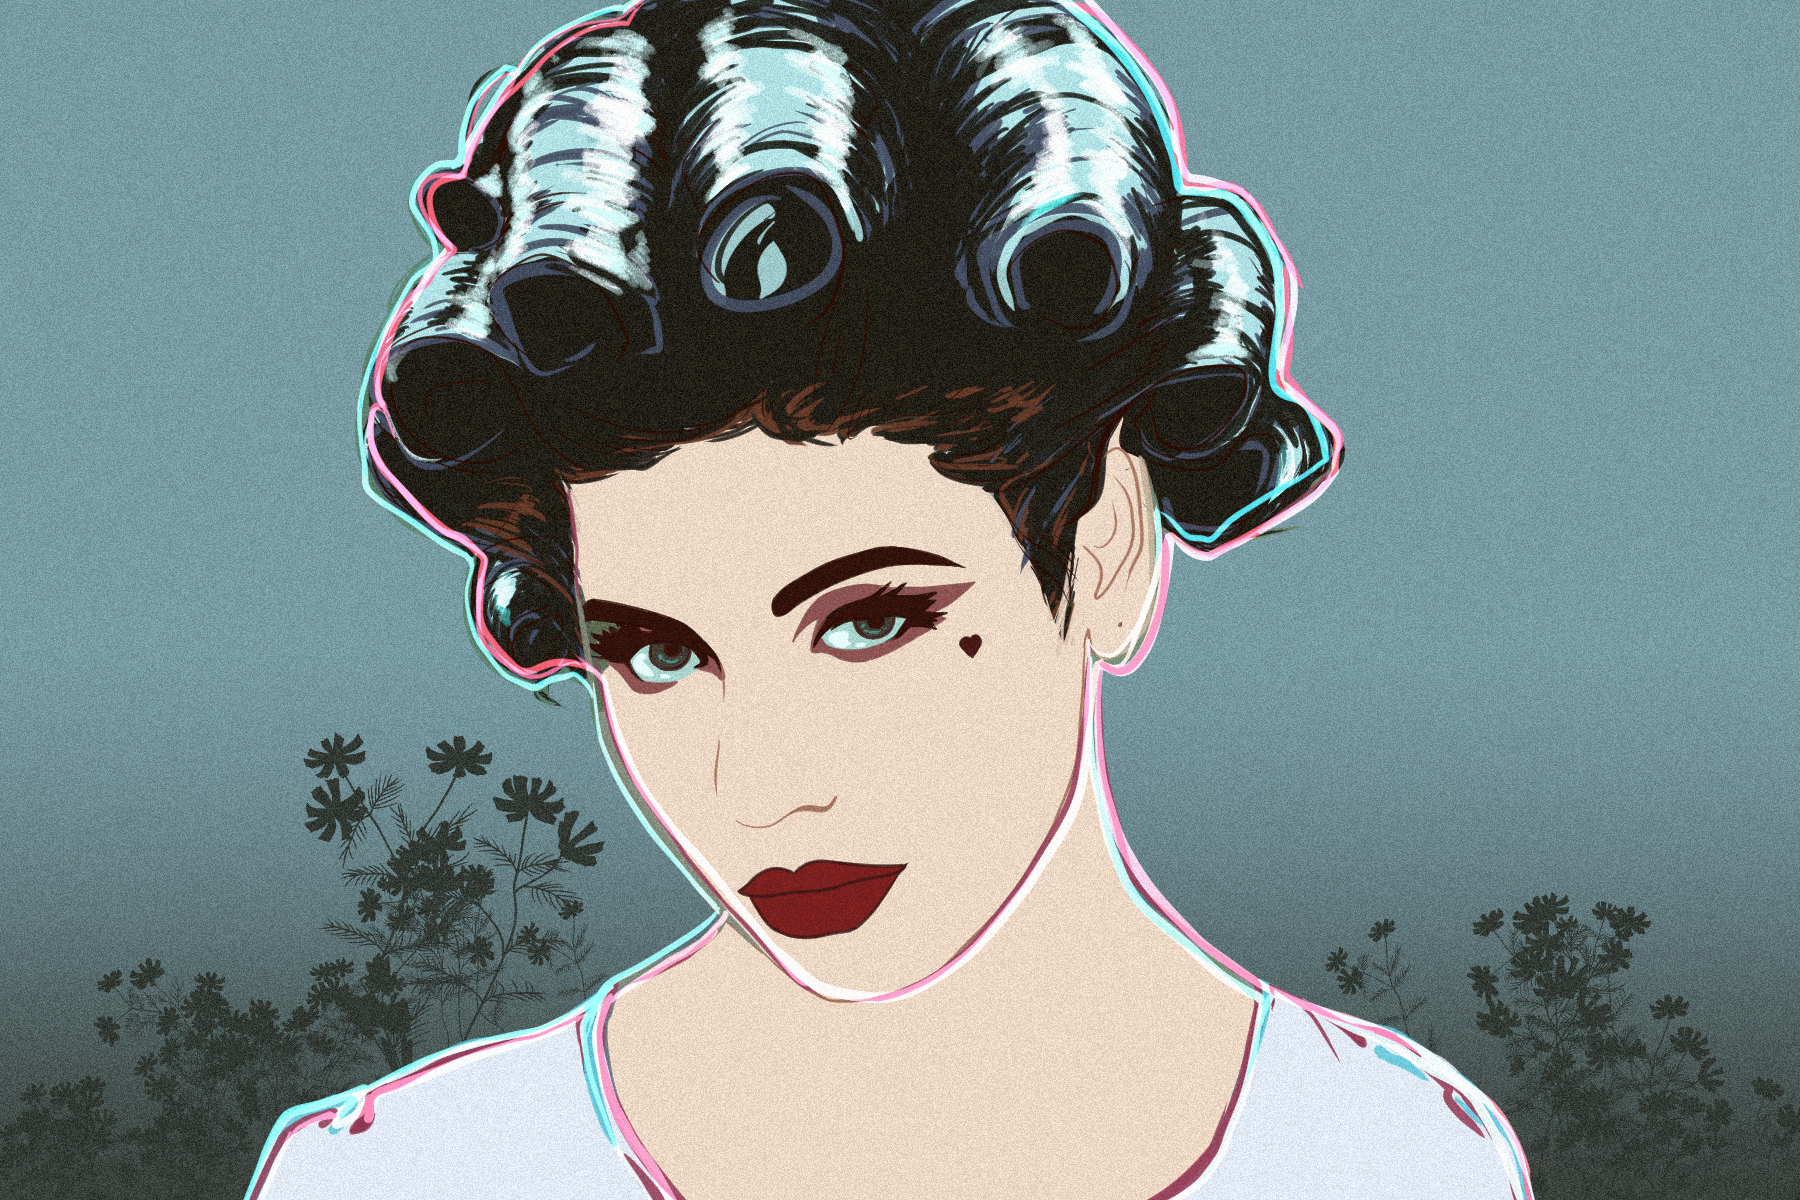 lead singer of marina and the diamonds, who wrote Electra Heart